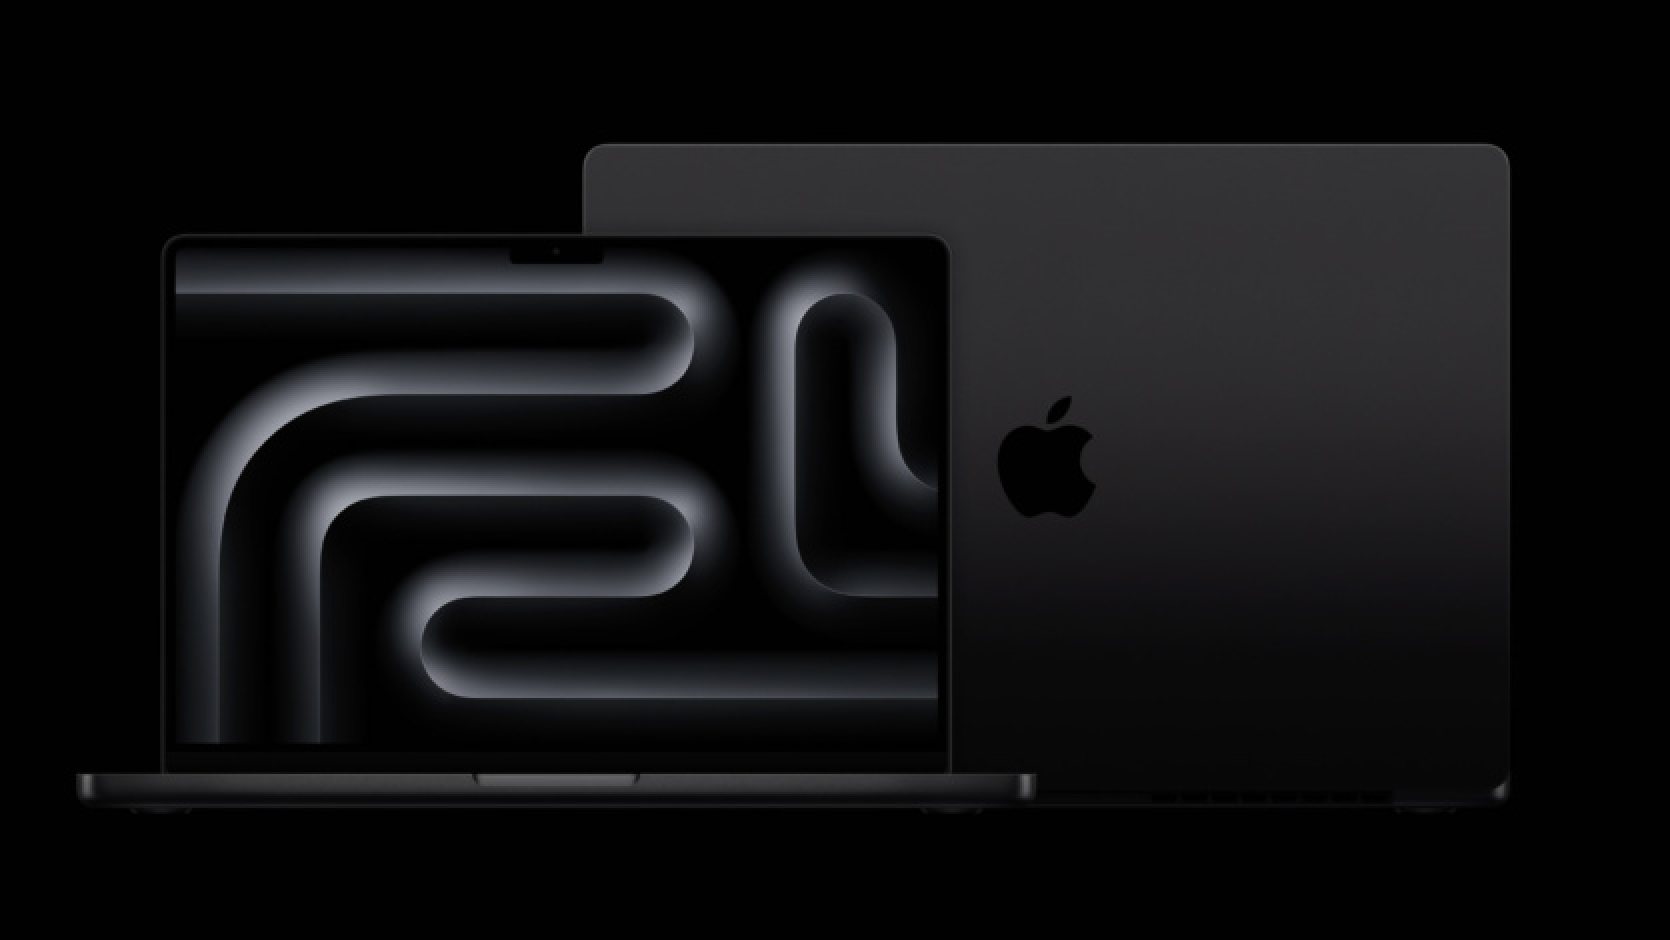 Apple will release iMac, MacBook Pro and Mac mini with M4 processors and AI features this year - Mark Gurman